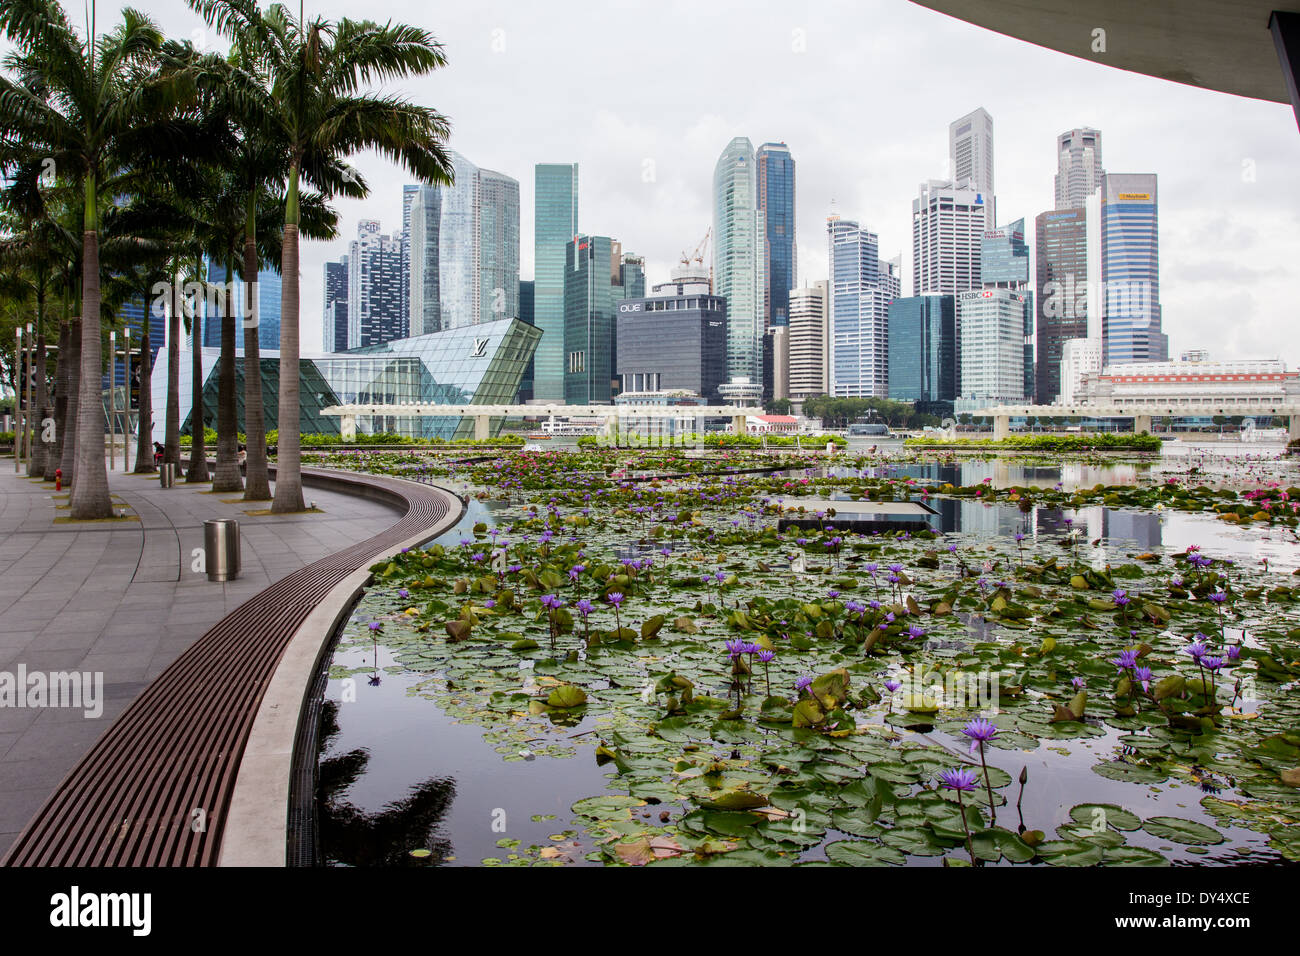 The view from the Marina Bay Promenade at Singapore's financial center Stock Photo